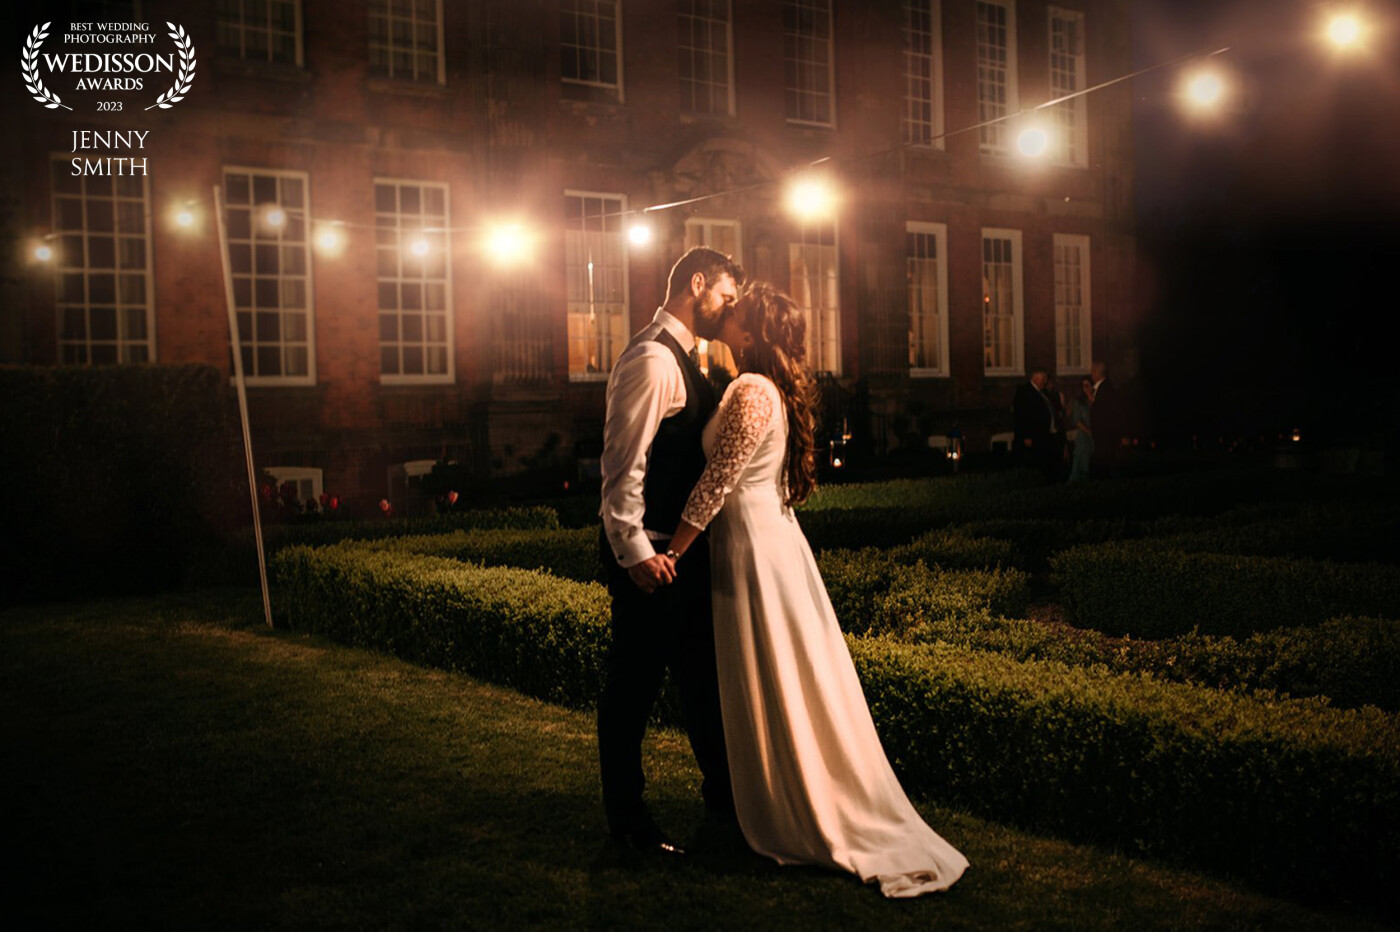 Marguerite and Rory got married at Rory’s childhood home of Cound Hall in Shropshire. The gardens were lit with fairy lights on the evening and we got this gorgeous photo of the couple in the ambient light.